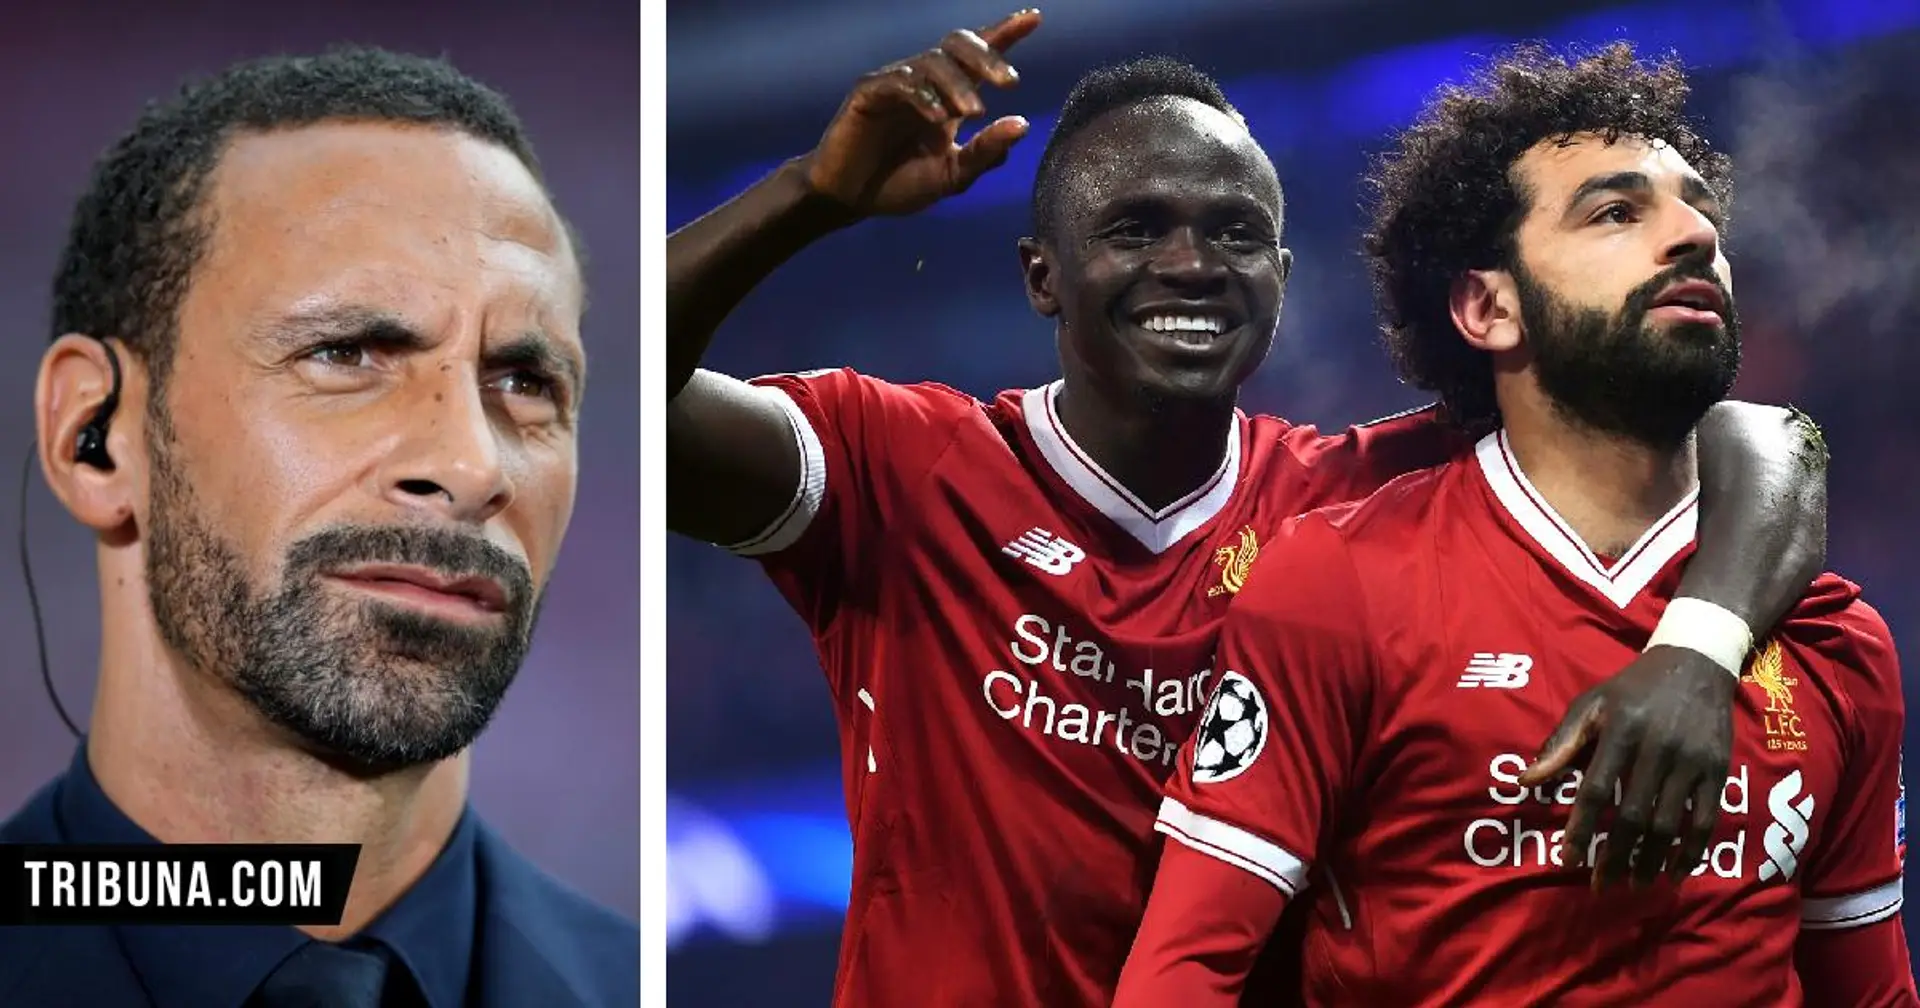 Rio Ferdinand: Liverpool need to sign better backups for Mane and Salah